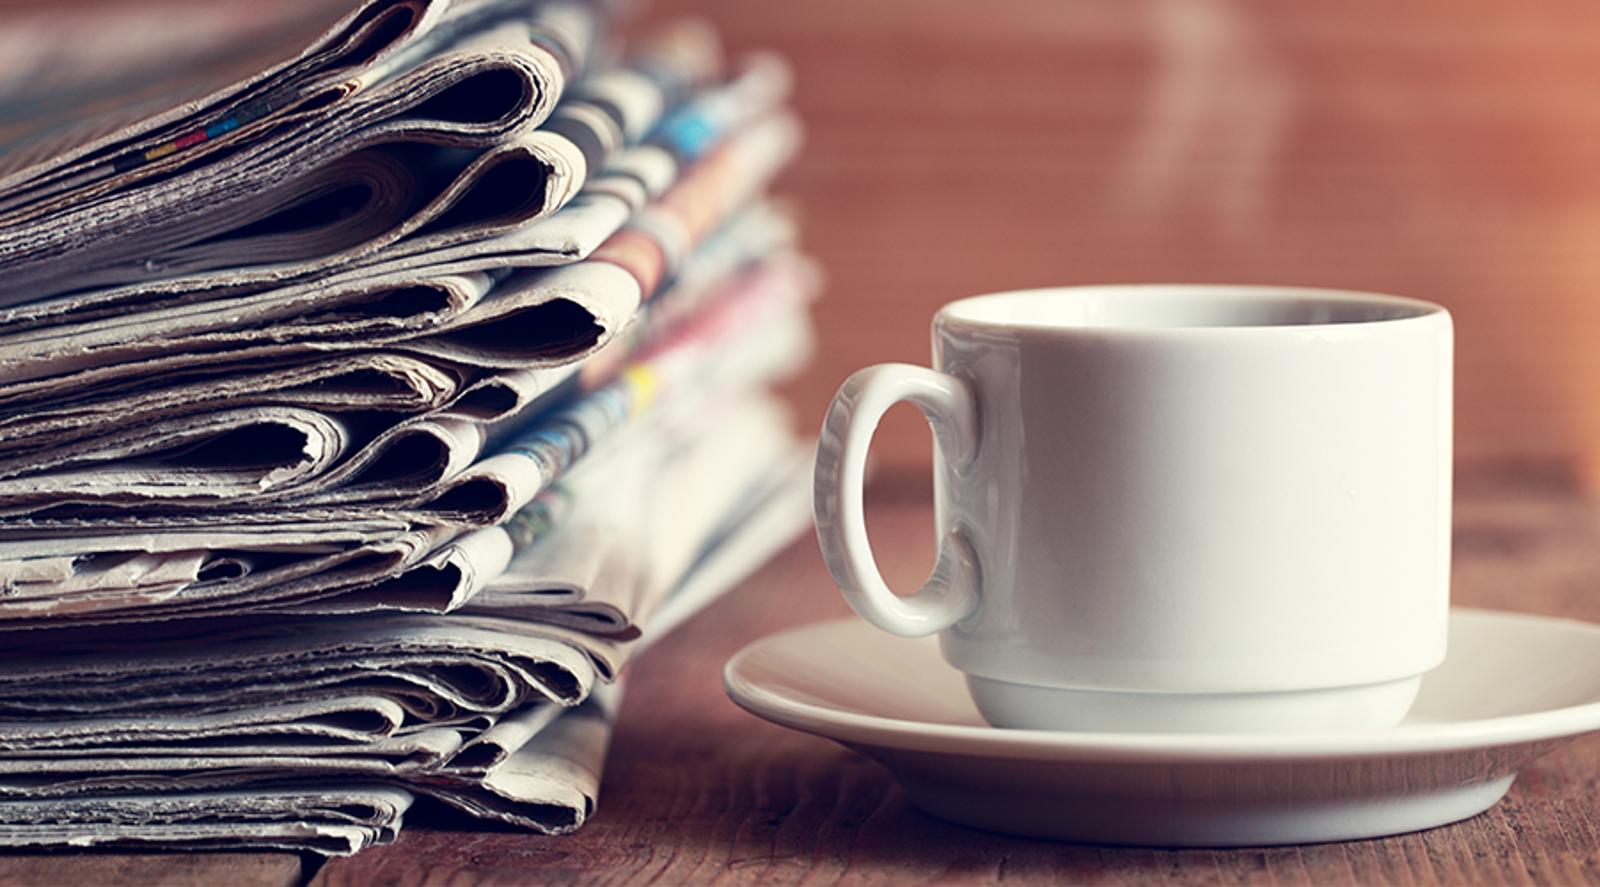 A steaming mug next to a stack of newspapers